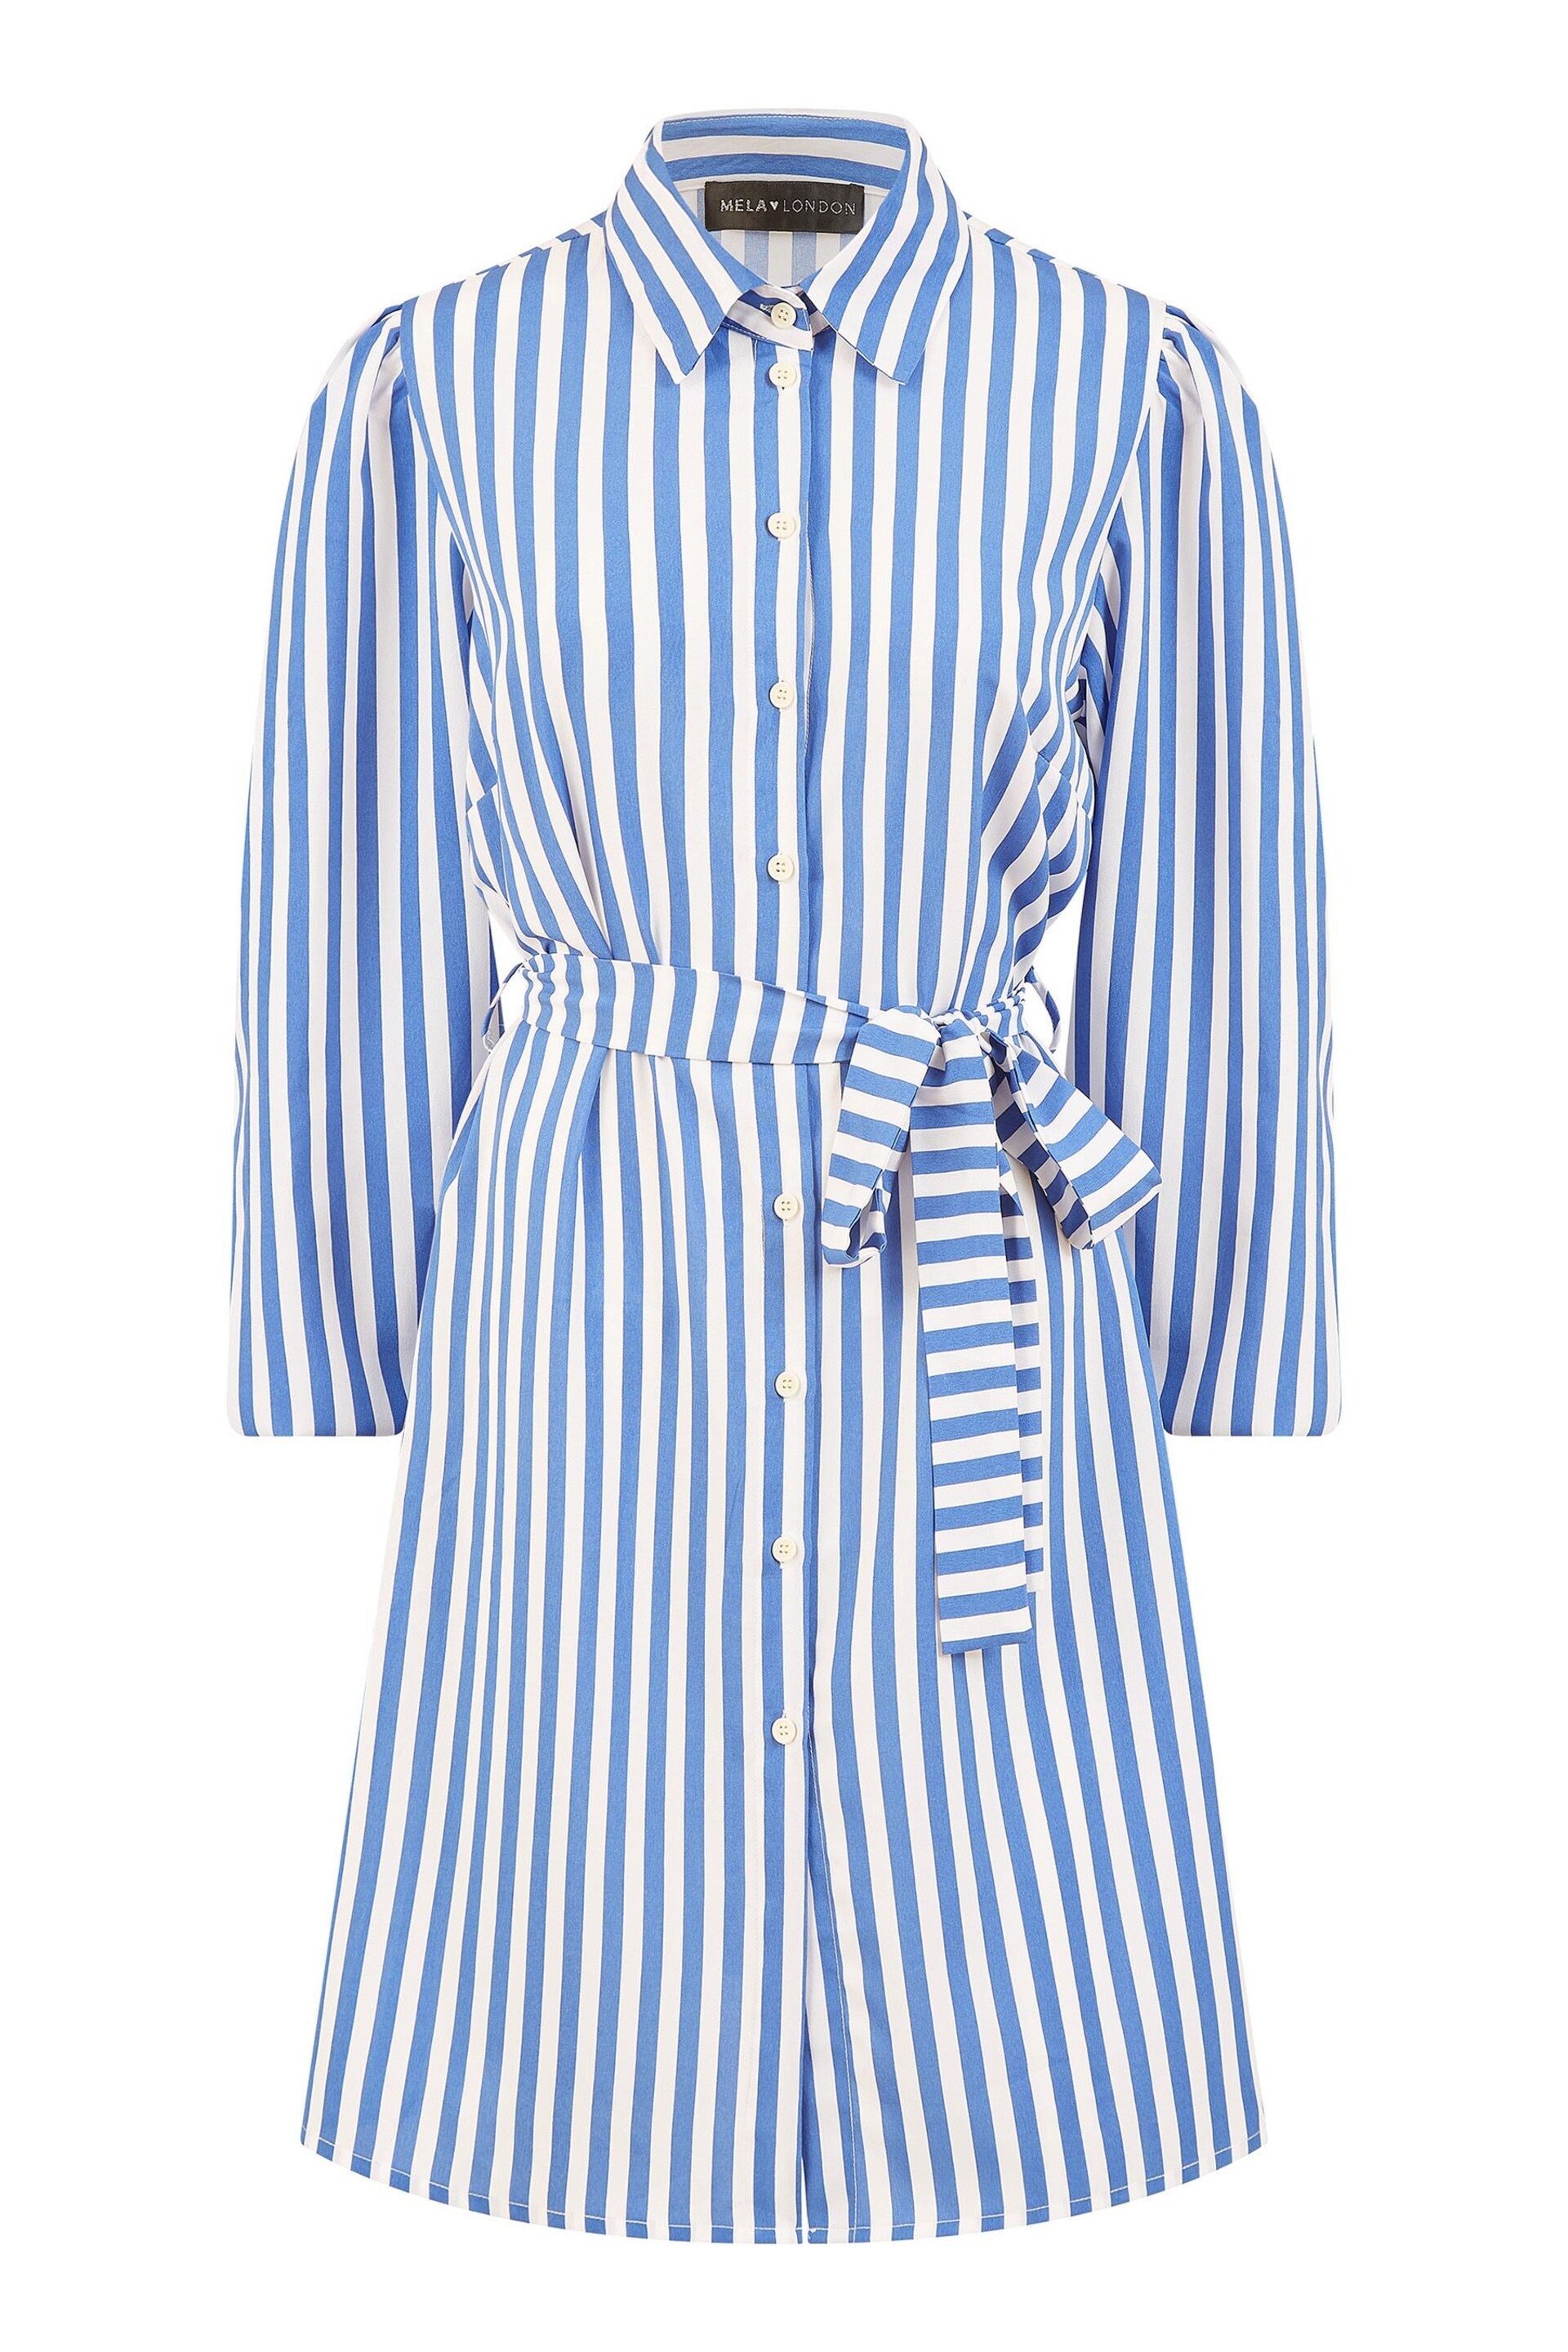 Mela Blue Striped Relaxed Fit Shirt Dress - Image 5 of 5